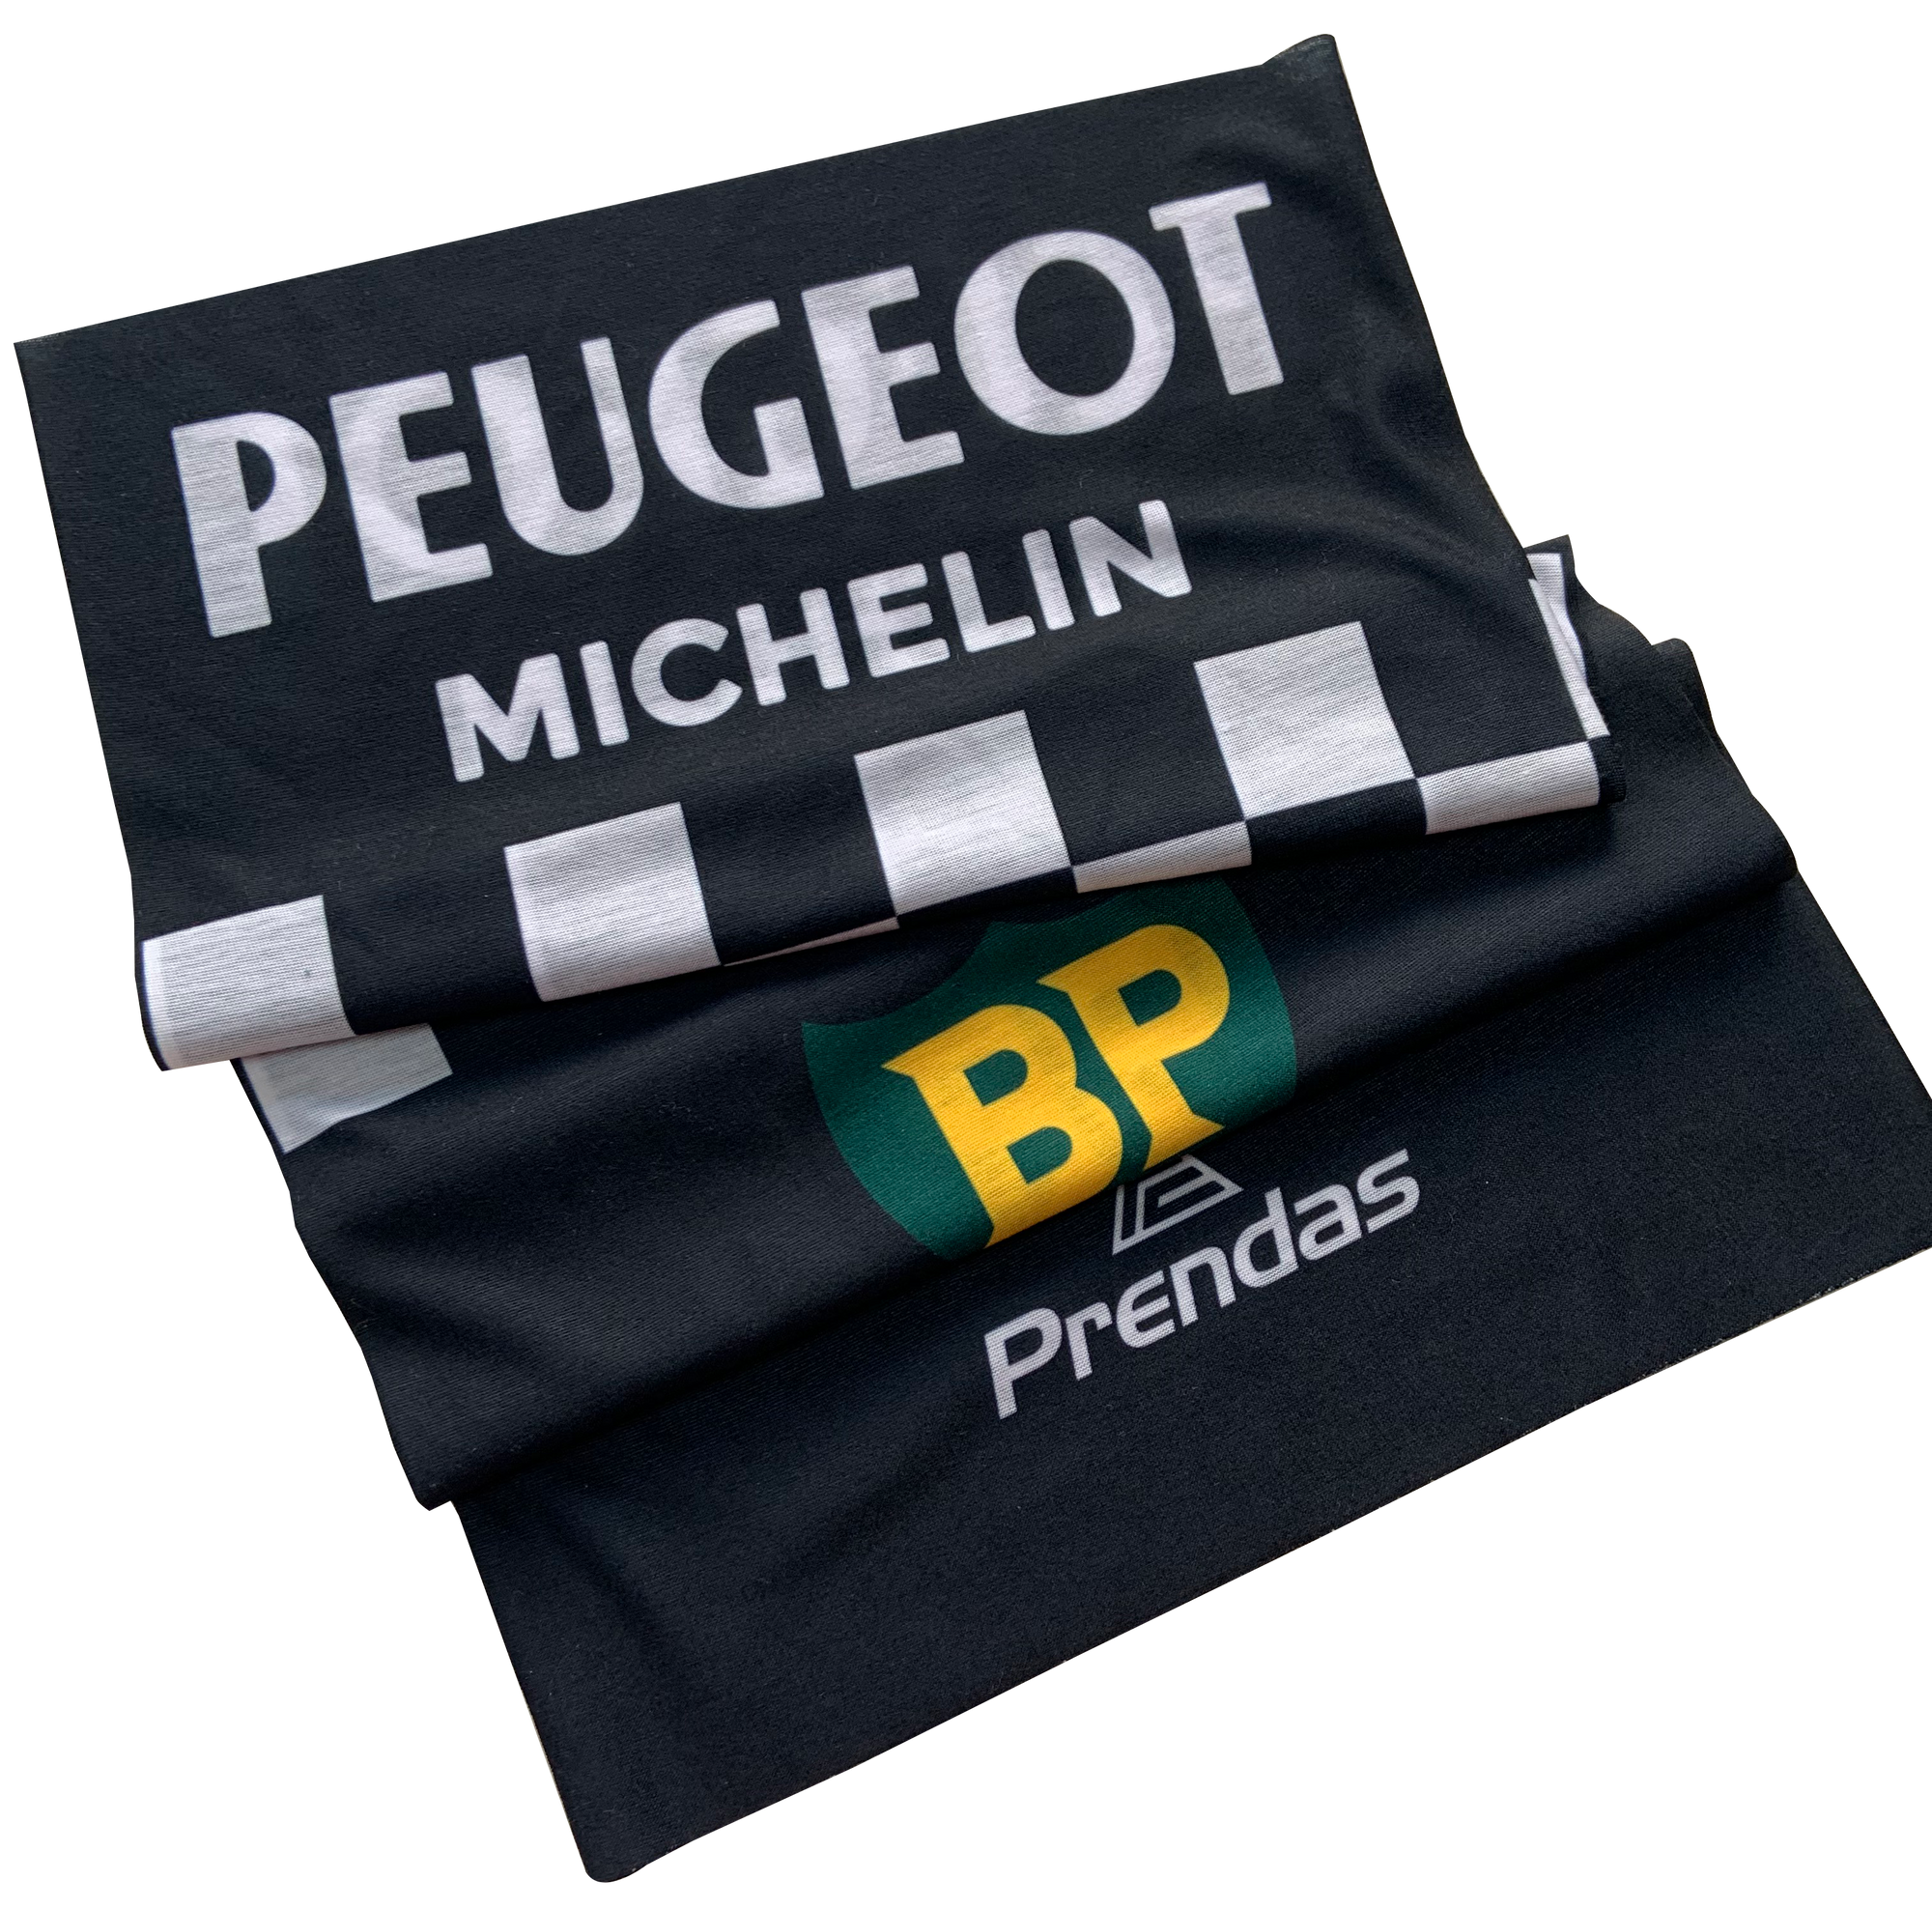 Peugeot Headover Scarf